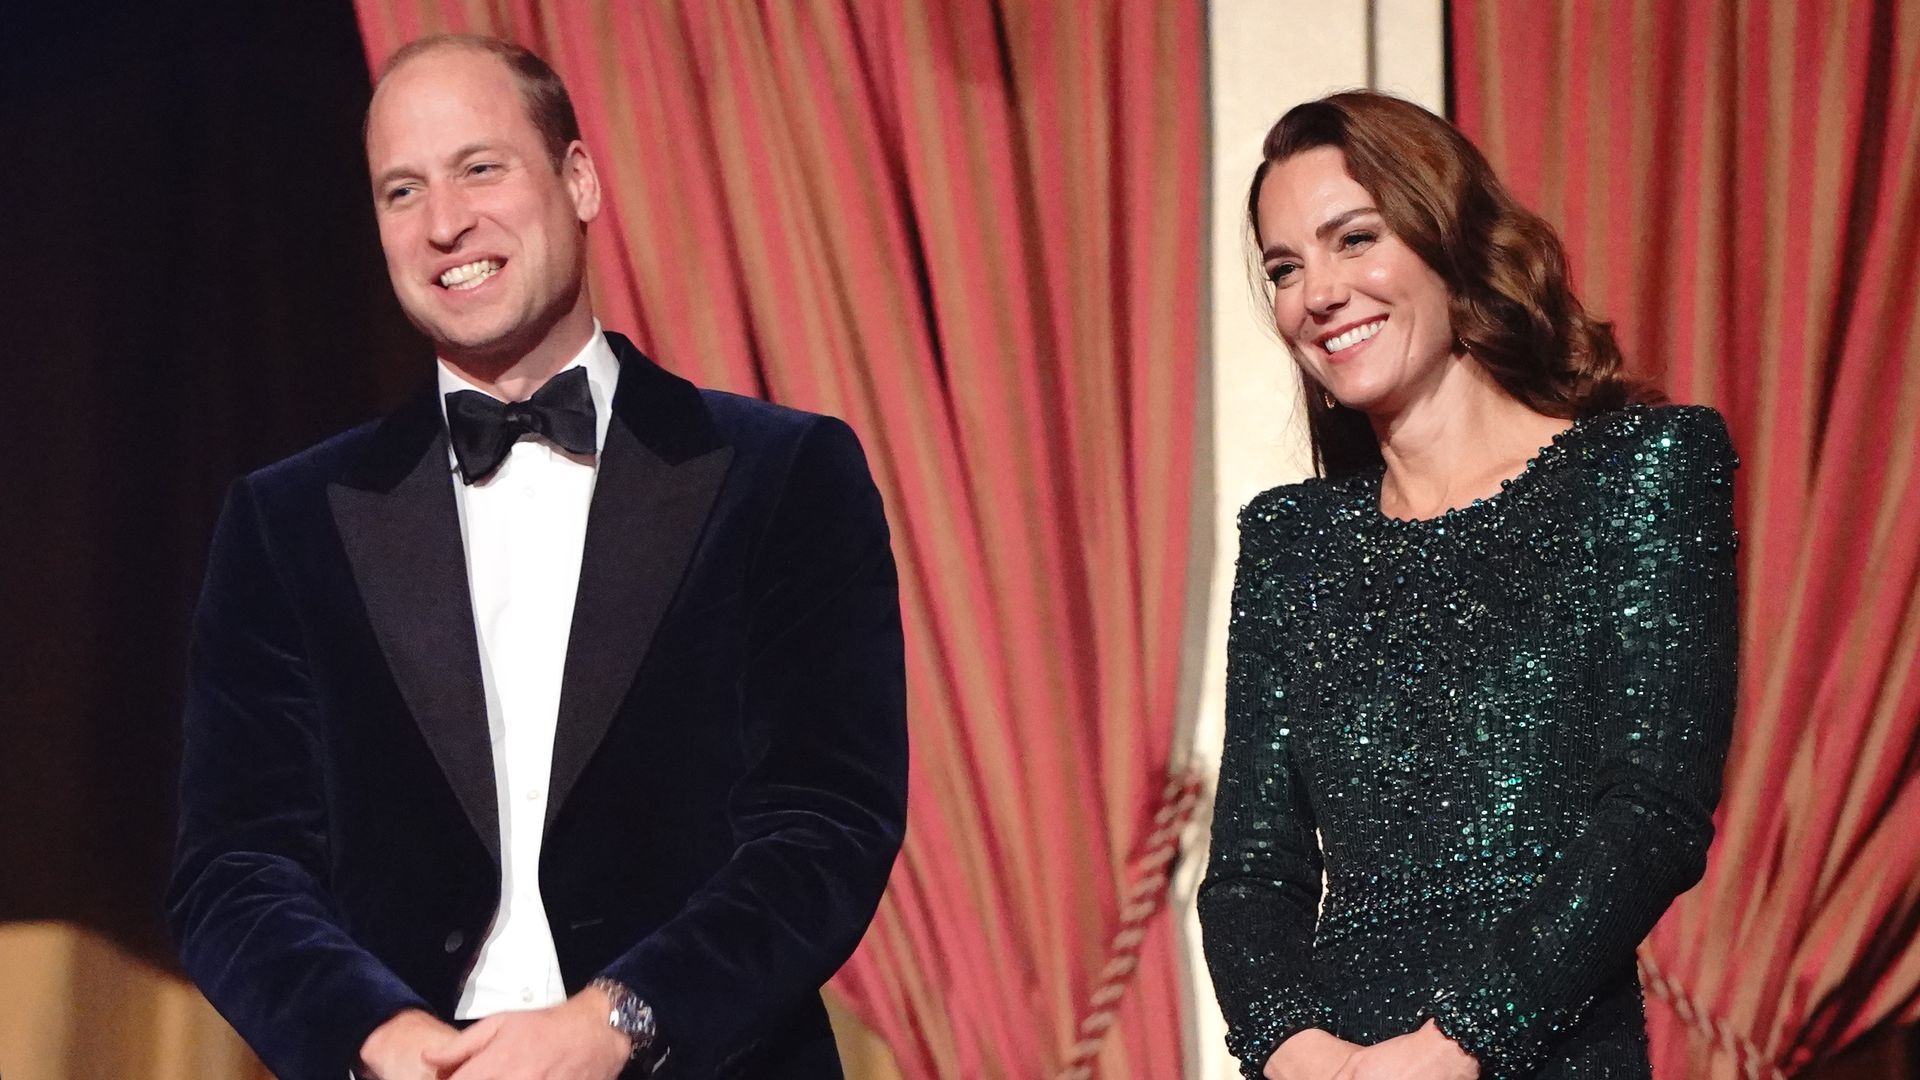 William and Kate smile in the royal box at Royal Variety Performance 2021